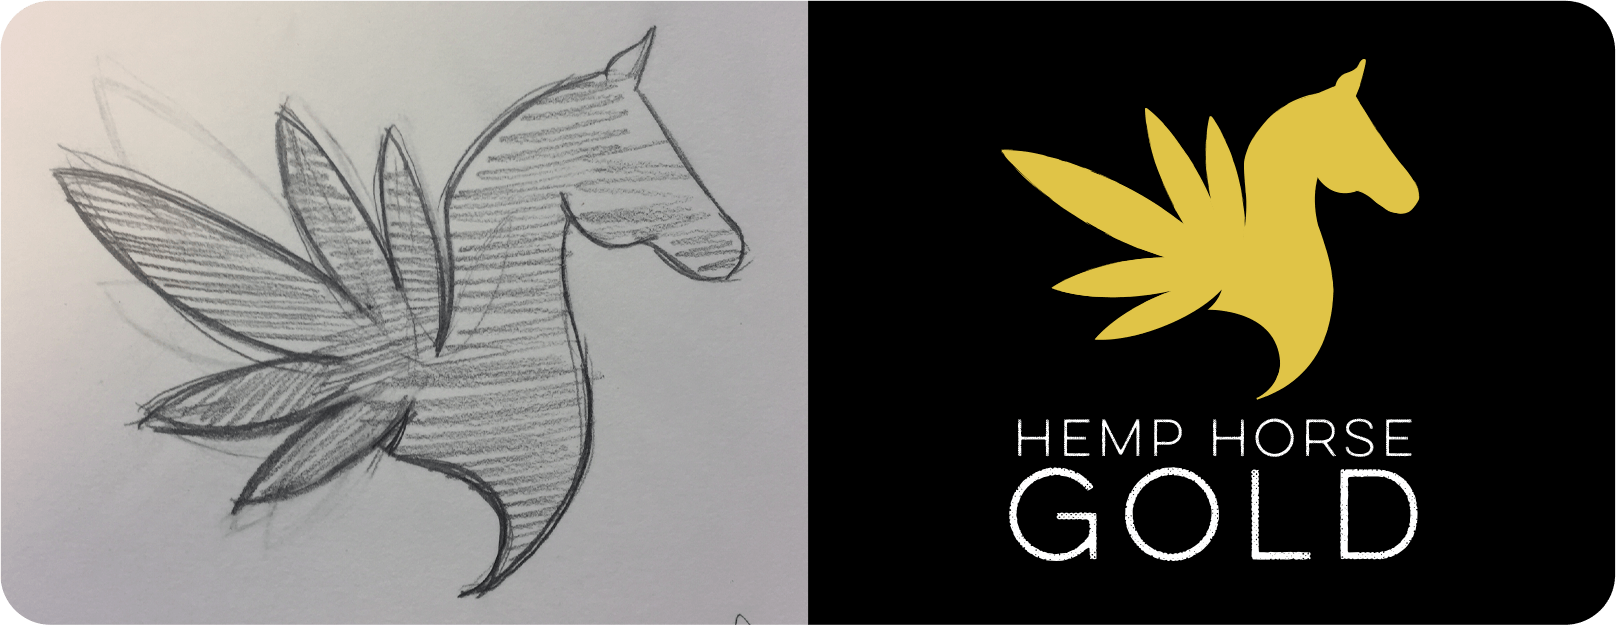 Hemp Horse logo design process, from sketch to finished product